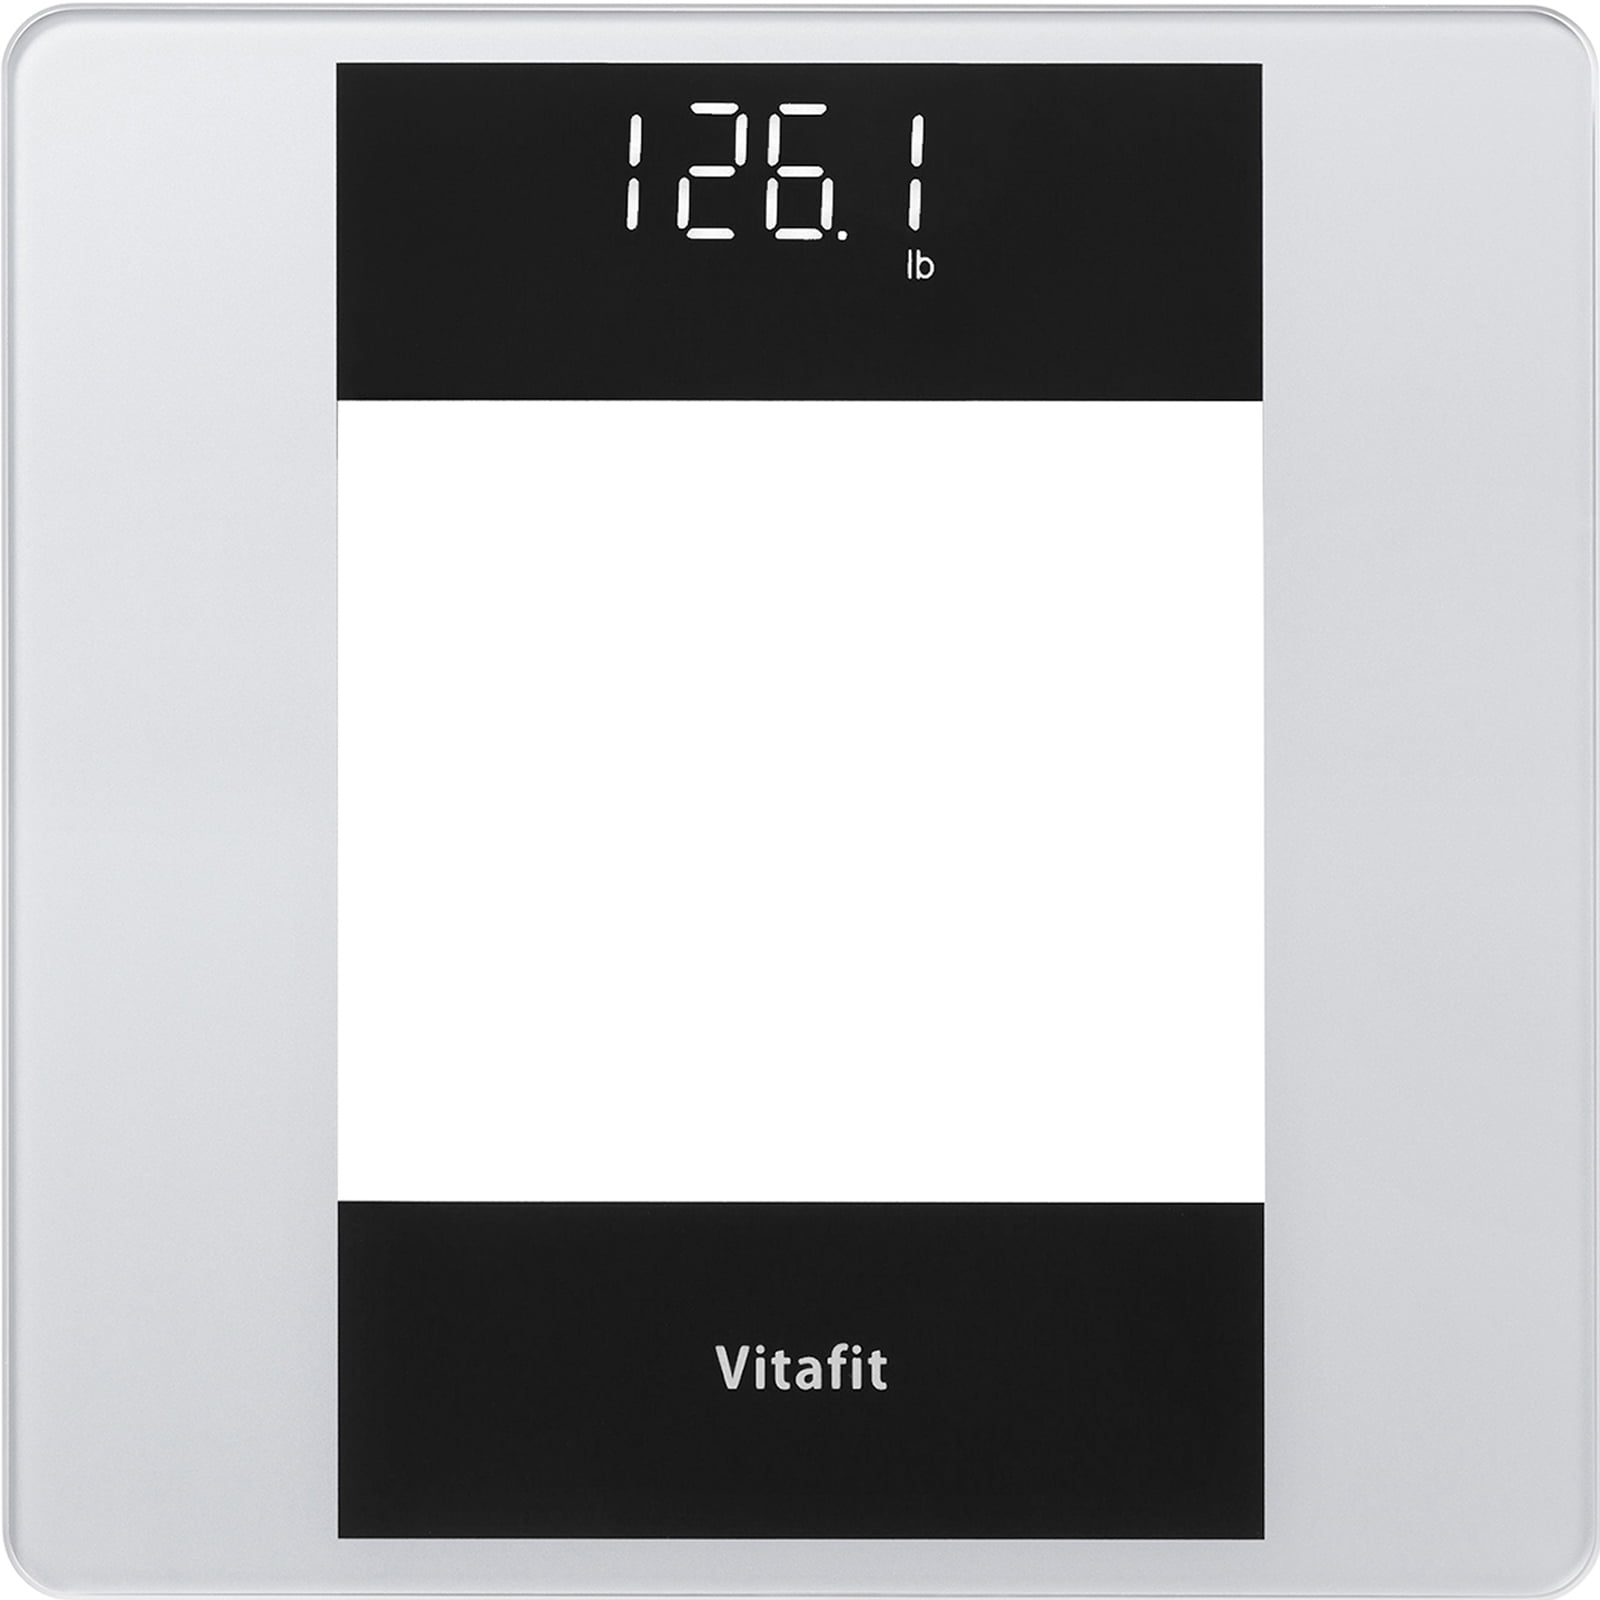 Vitafit Digital Body Weight Bathroom Scale, Focusing on High Precision  Technology for Weighing Over 20 Years, Extra Large Blue Backlit LCD and  Step-O - Imported Products from USA - iBhejo